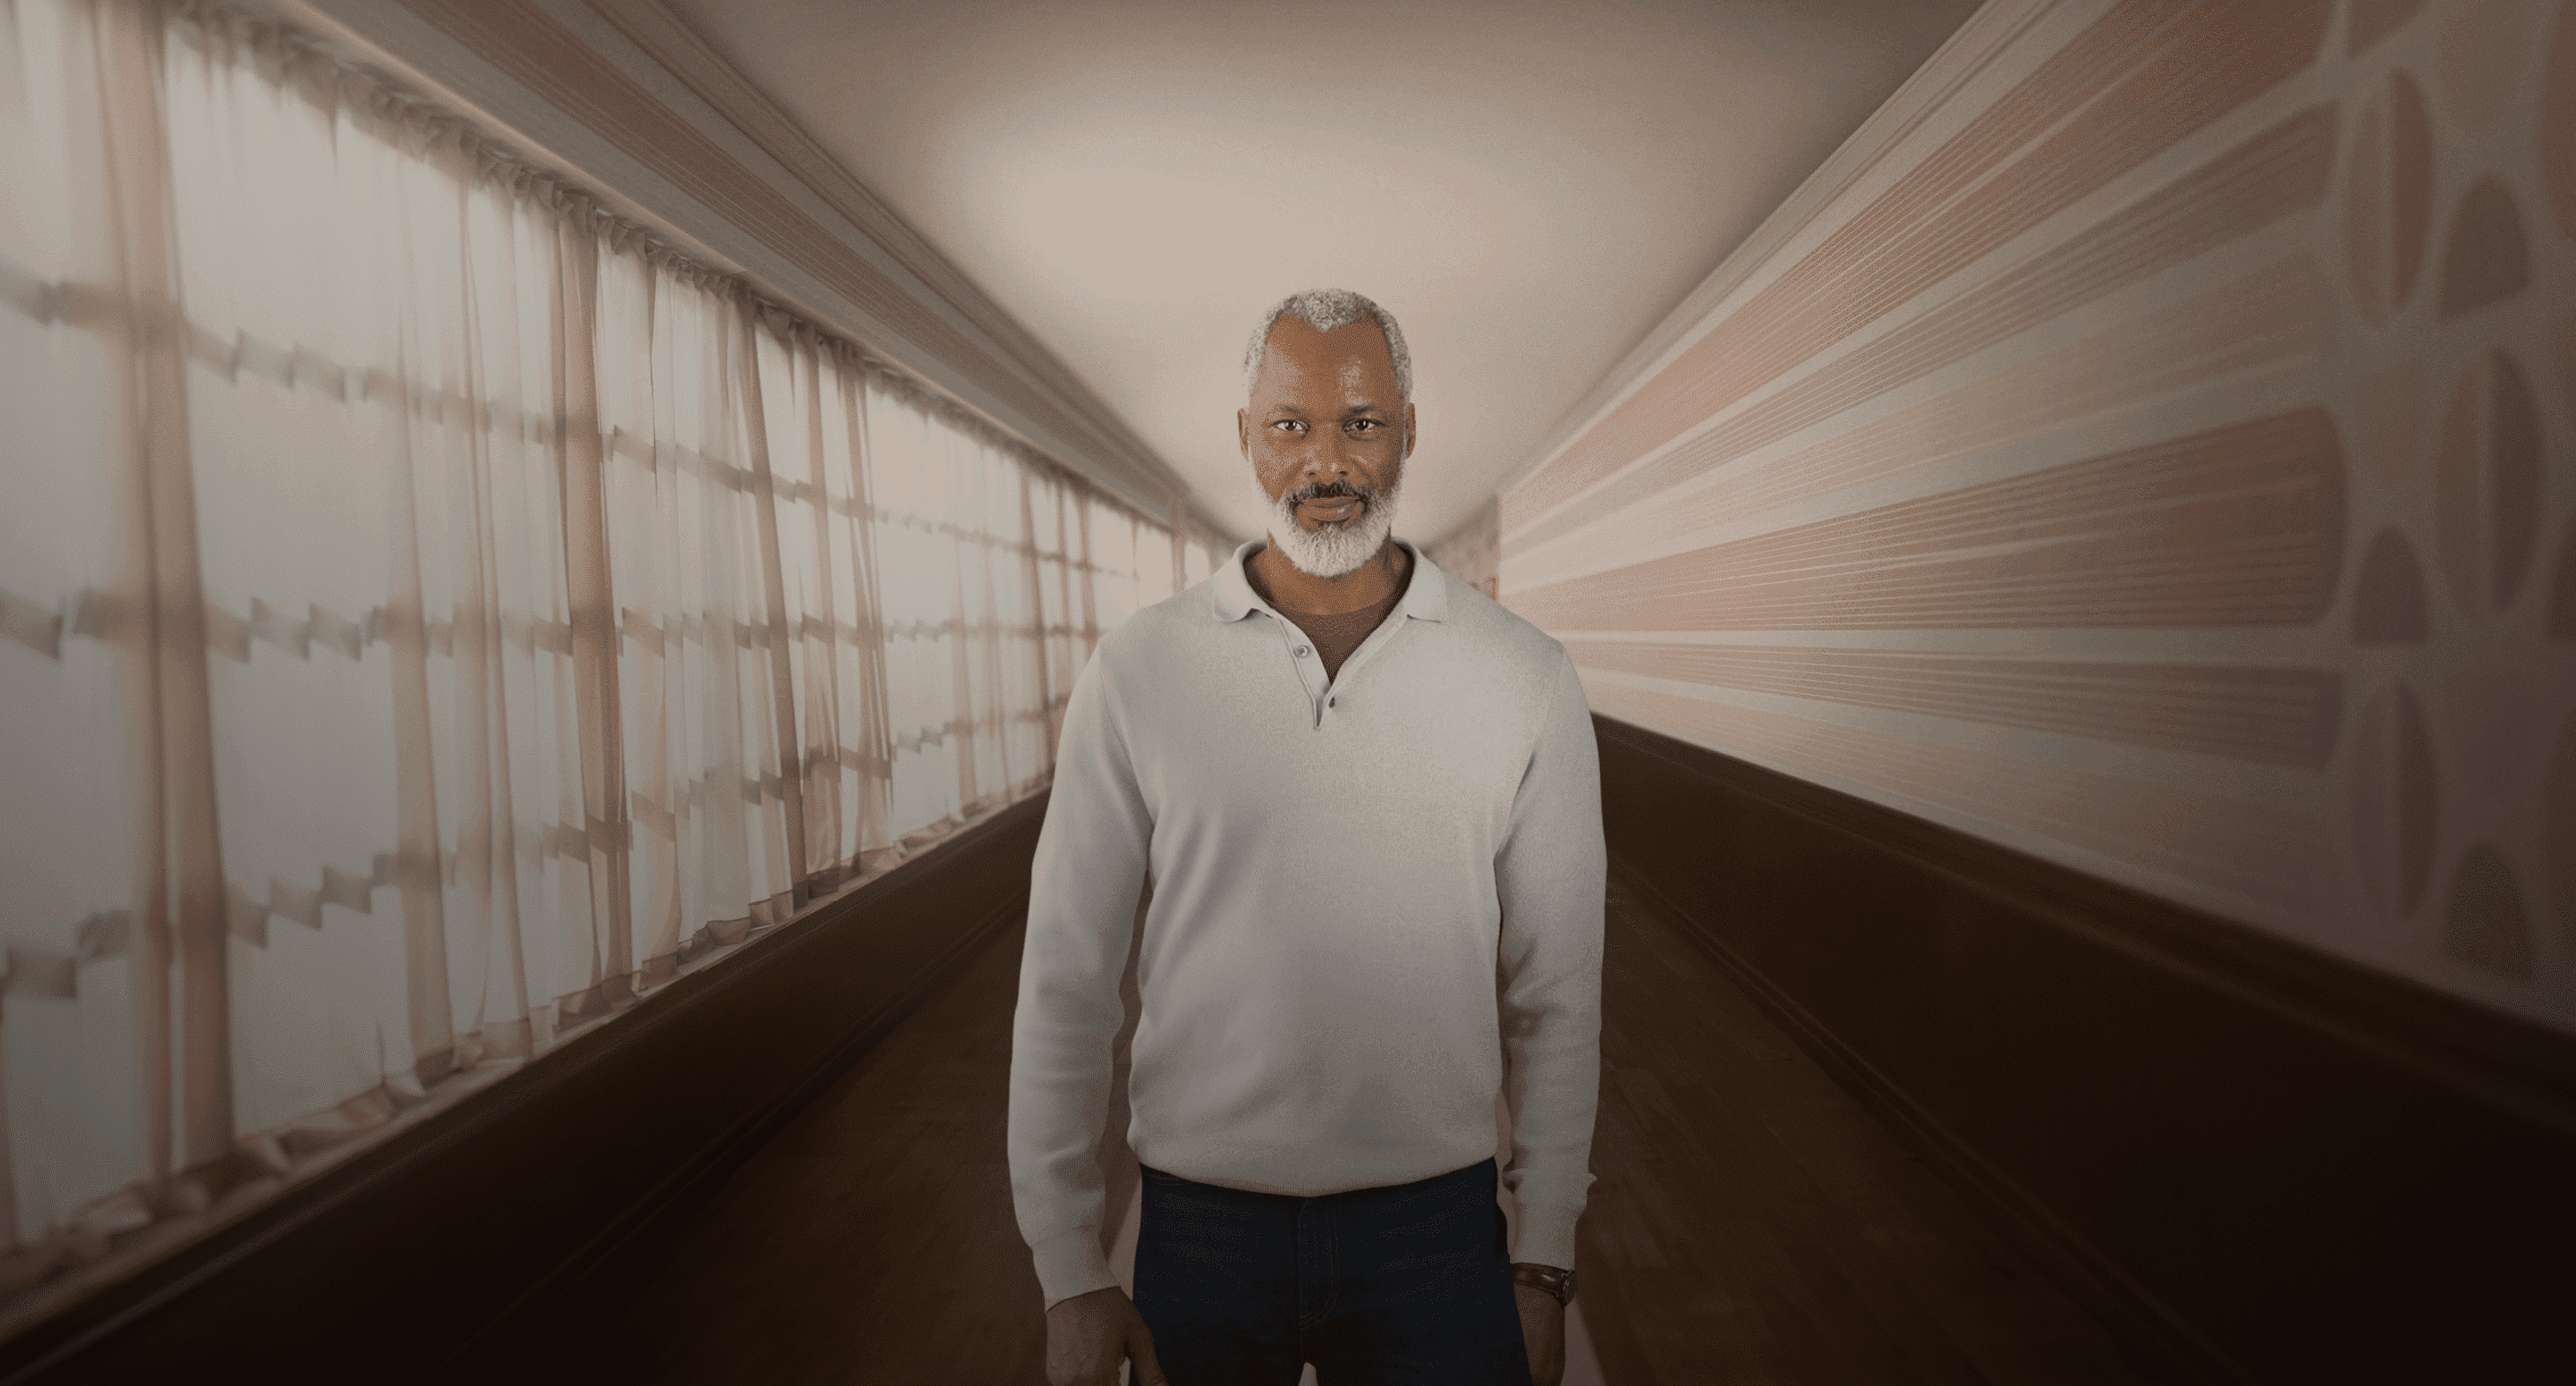 Man standing in a hallway